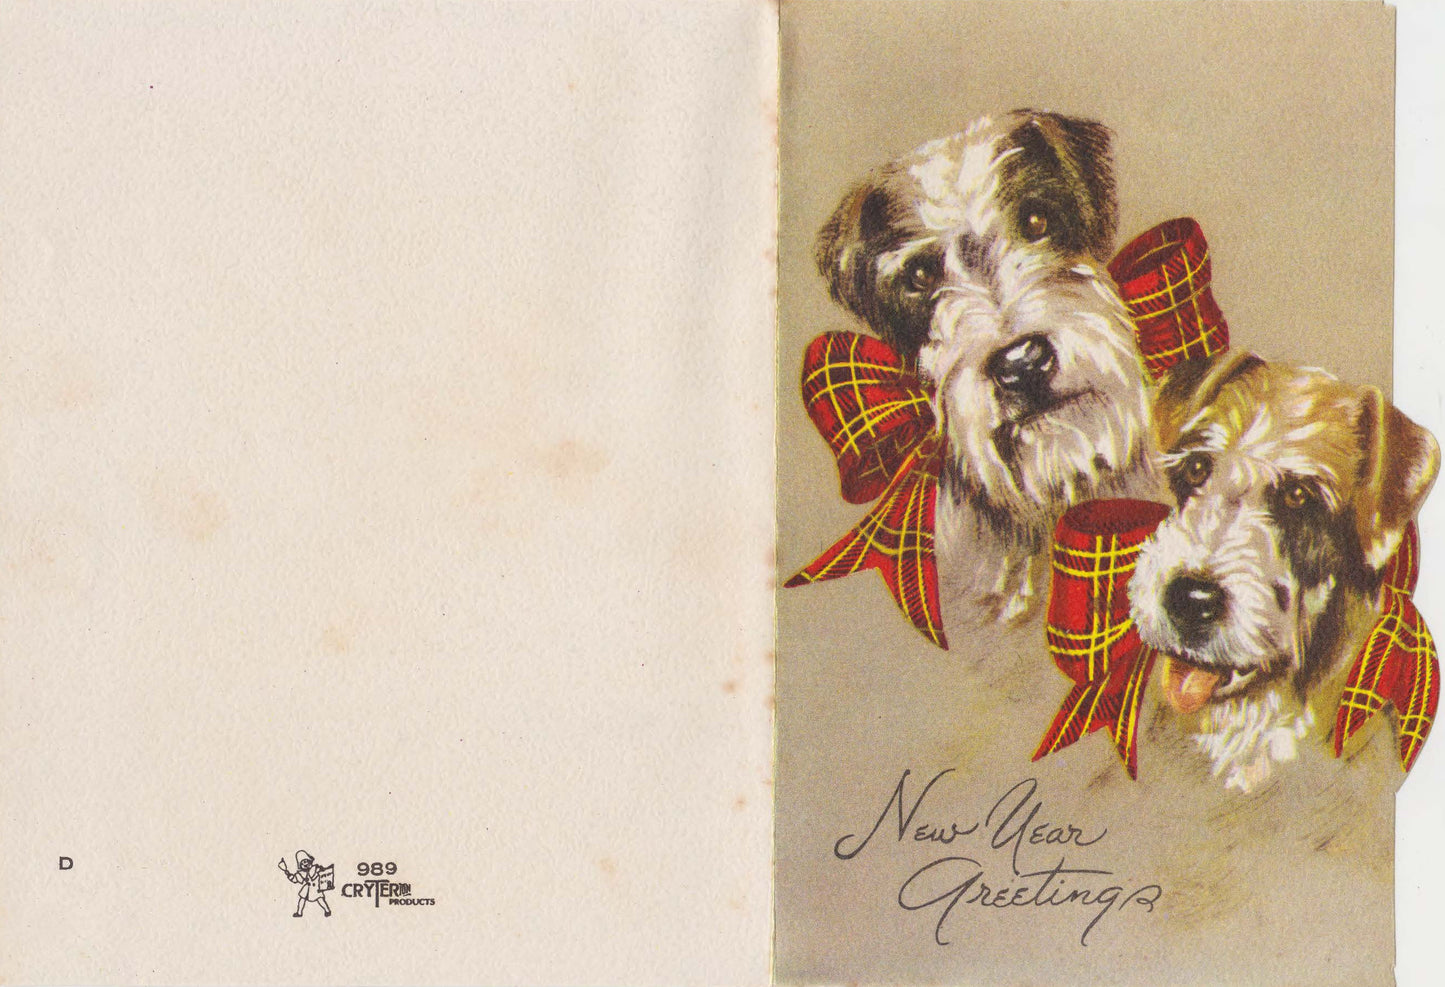 Harry Rogers Greeting Card #3